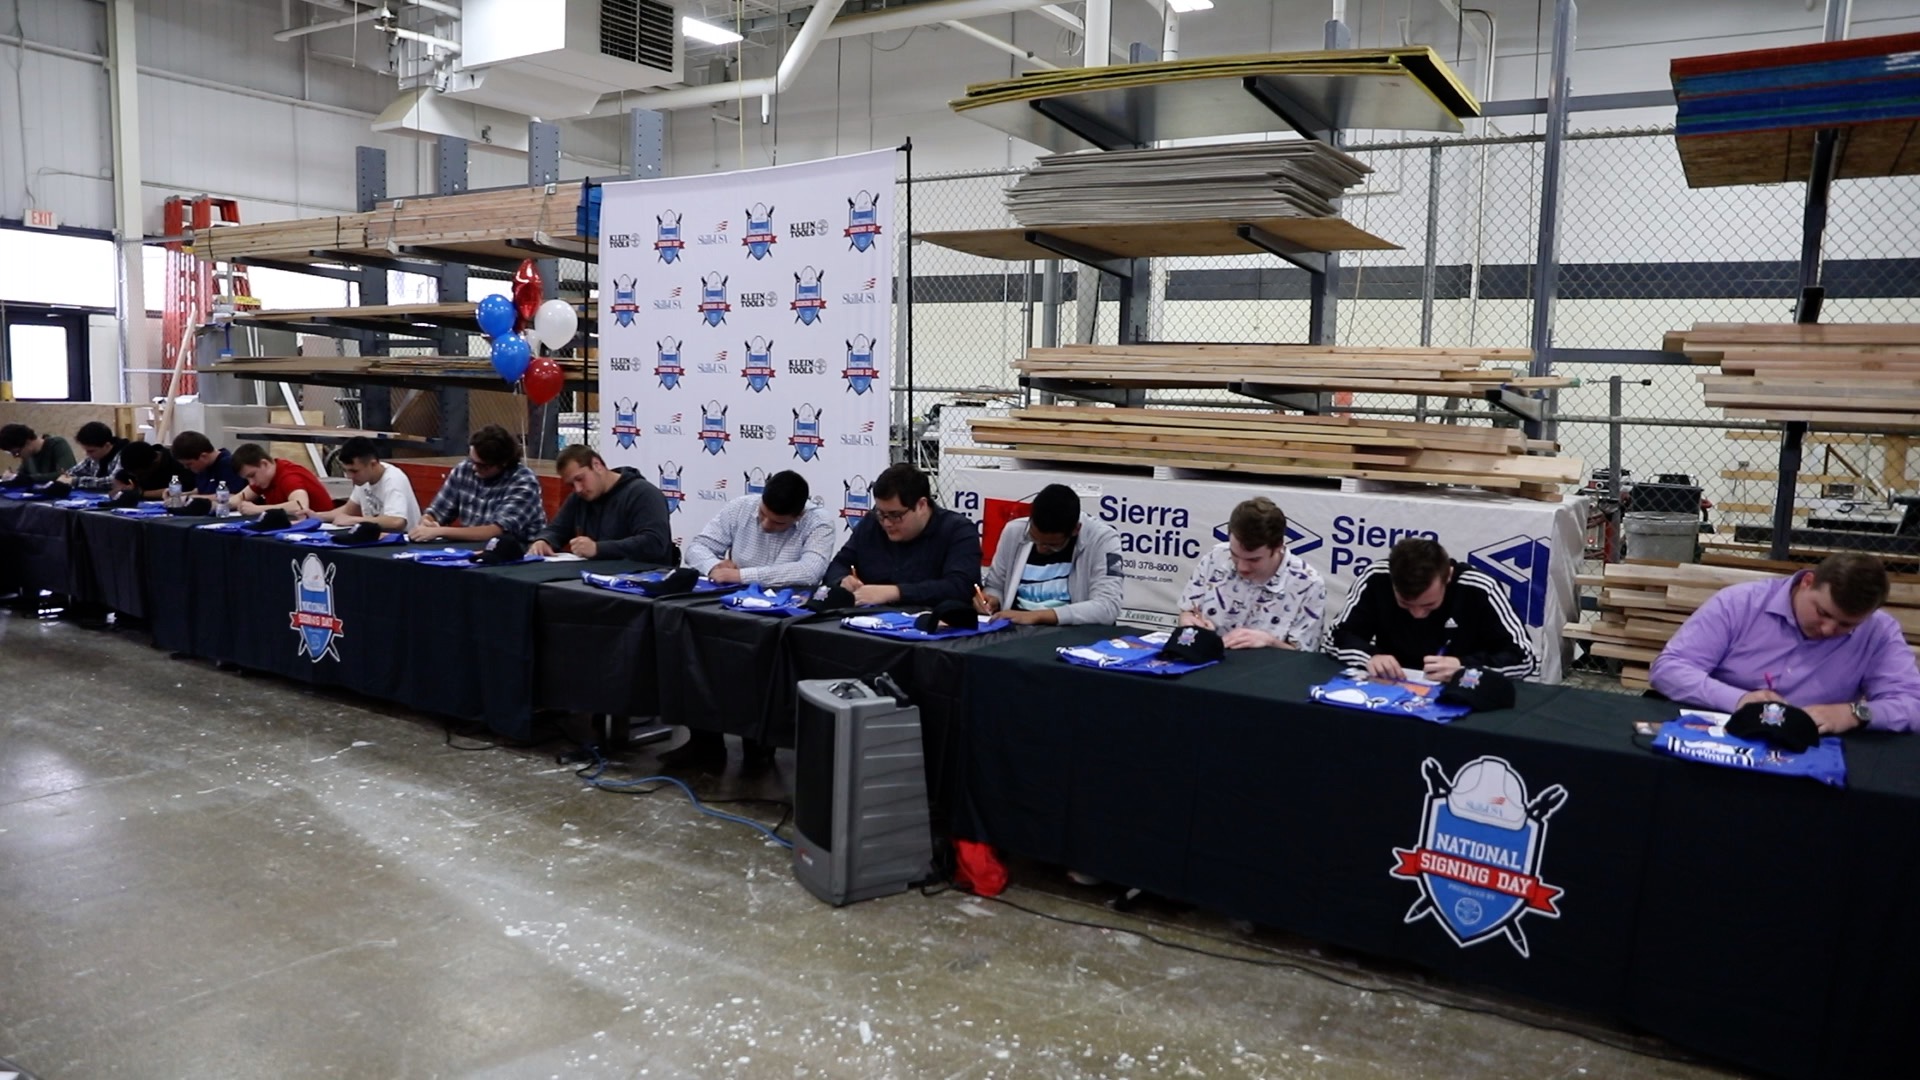 SkillsUSA National Signing Day, Presented by Klein Tools - NYX Awards Winner 